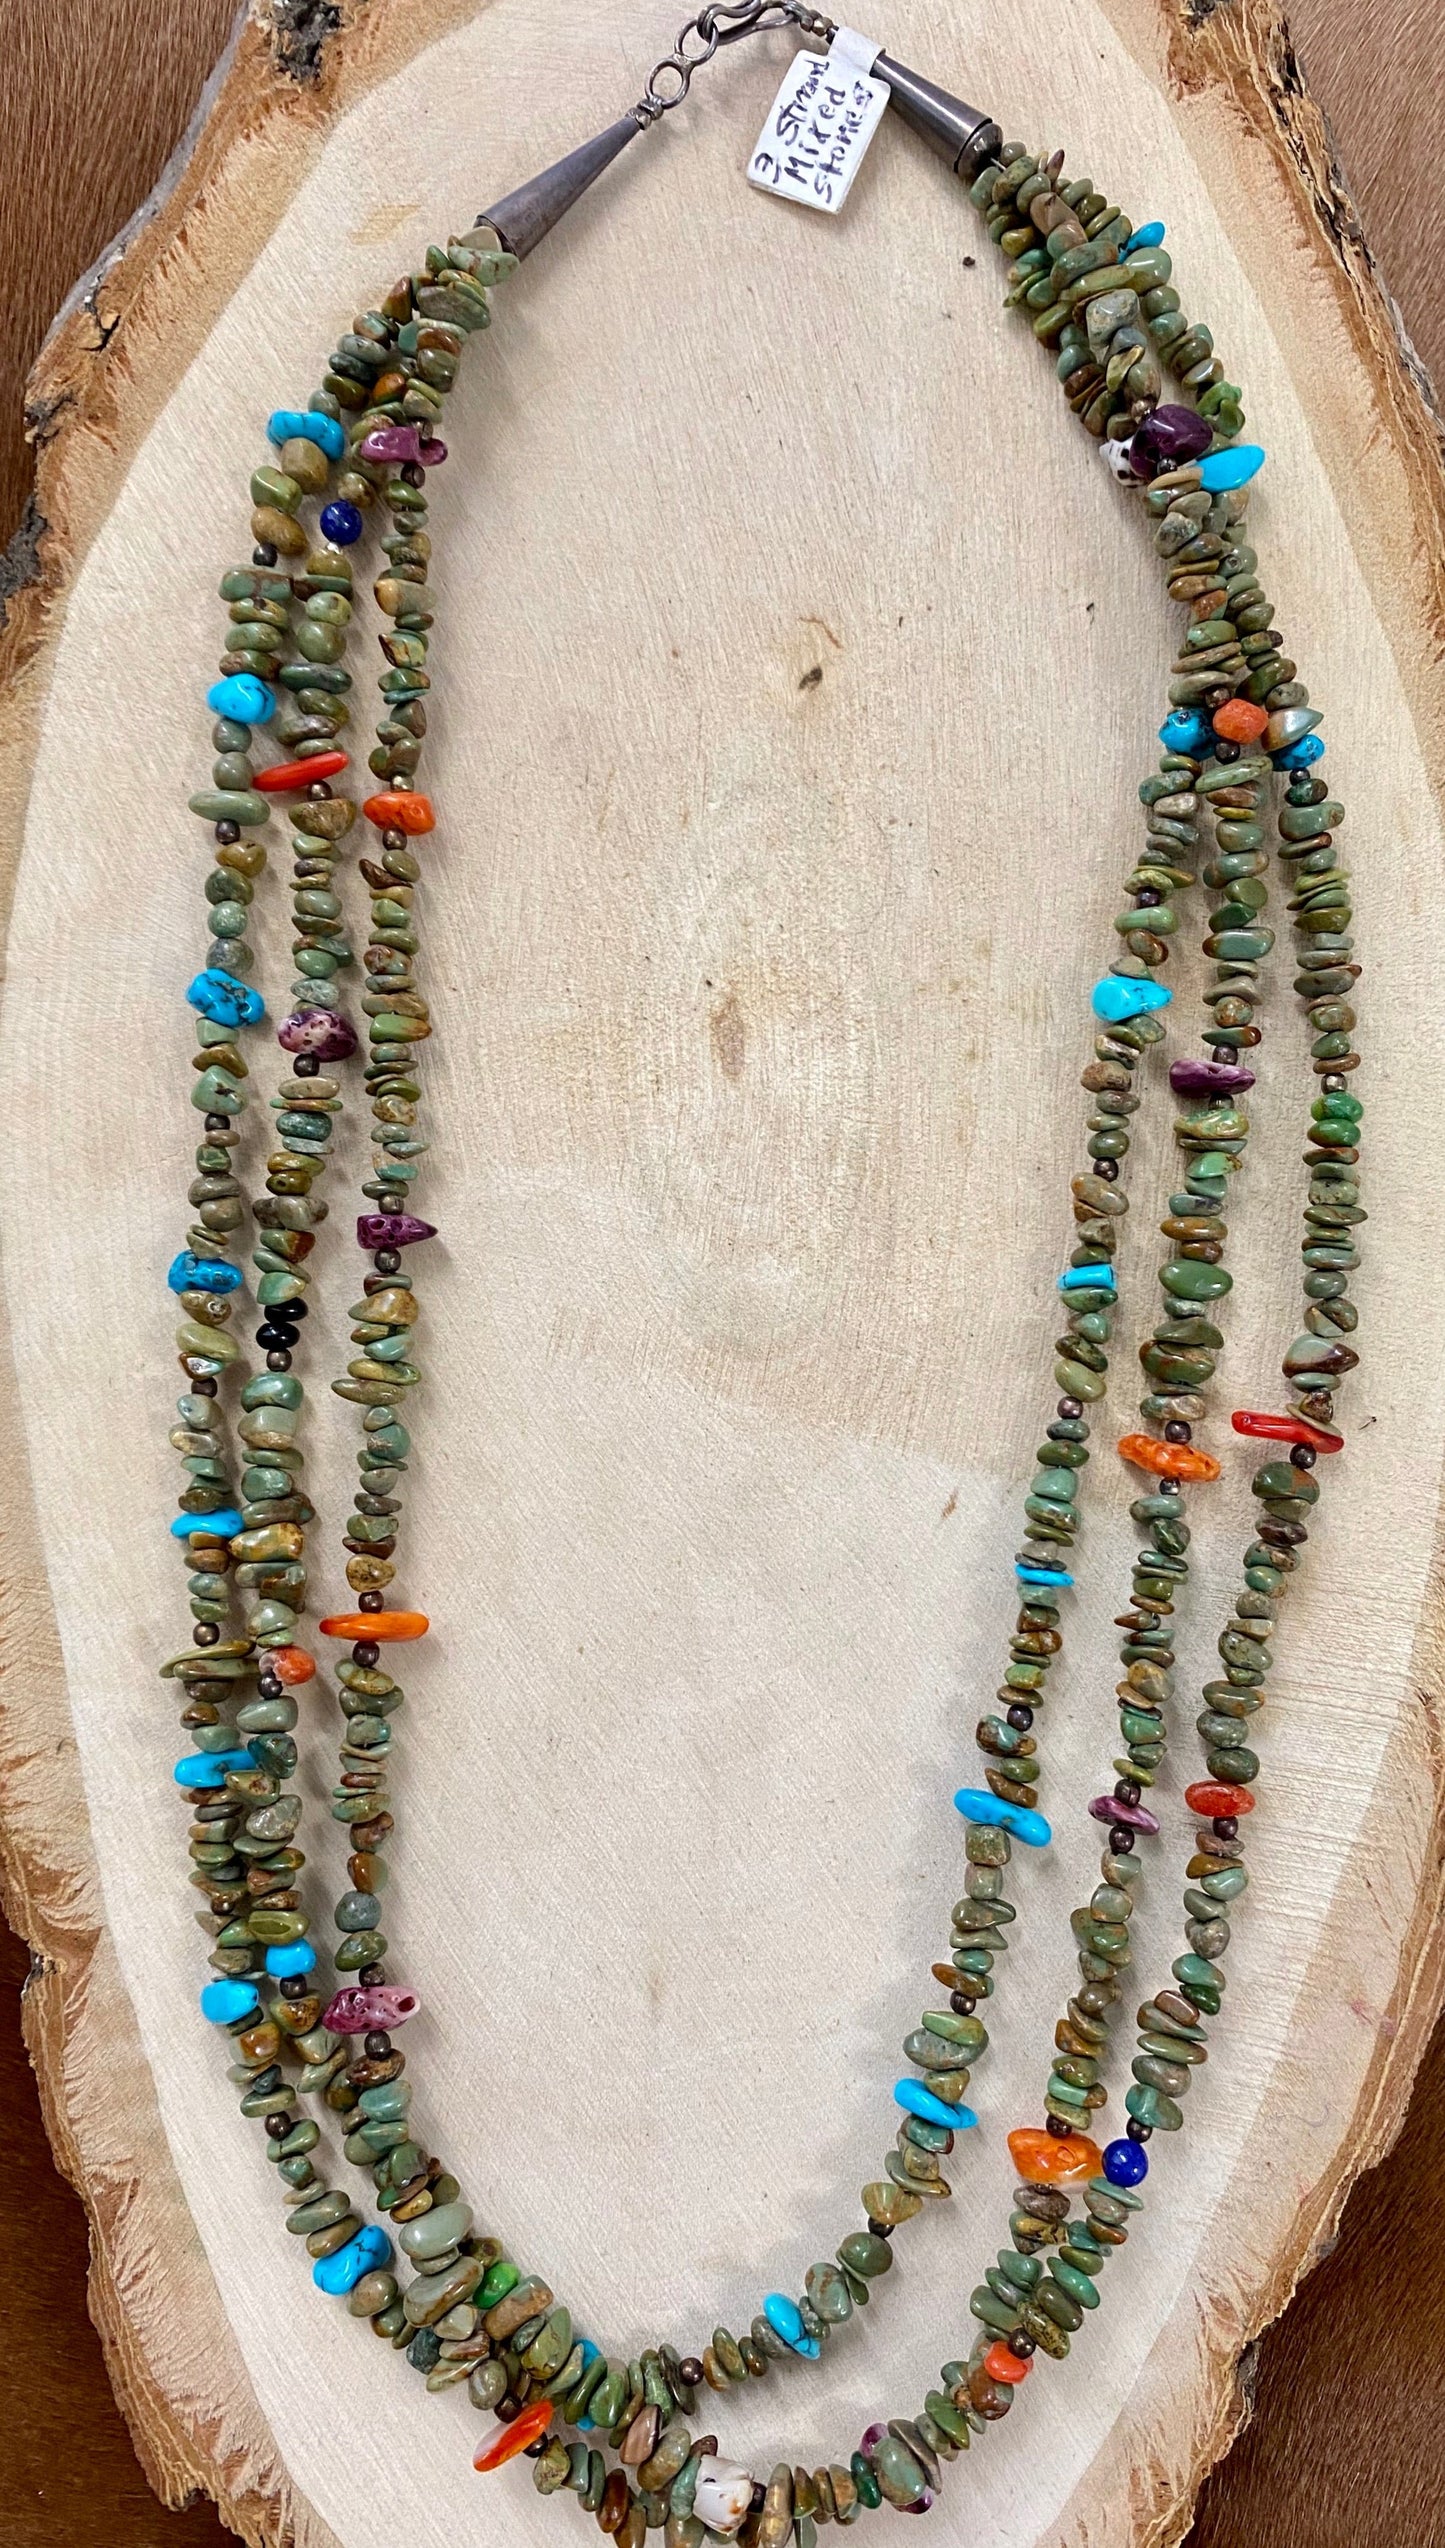 Green Turquoise Necklace